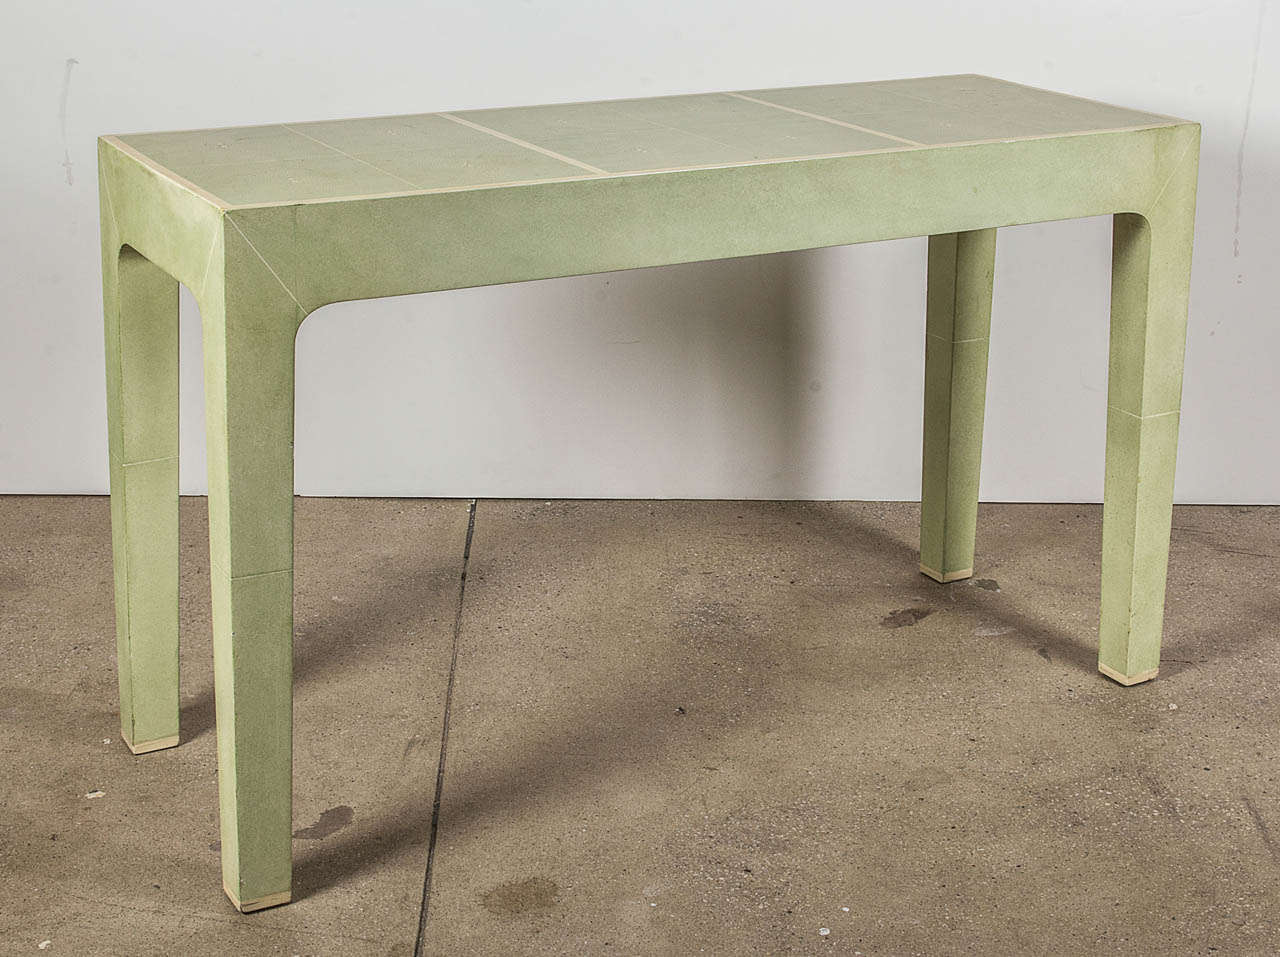 Fantastic shagreen lacquered finish console in pale green and ivory, designed by Karl Springer.